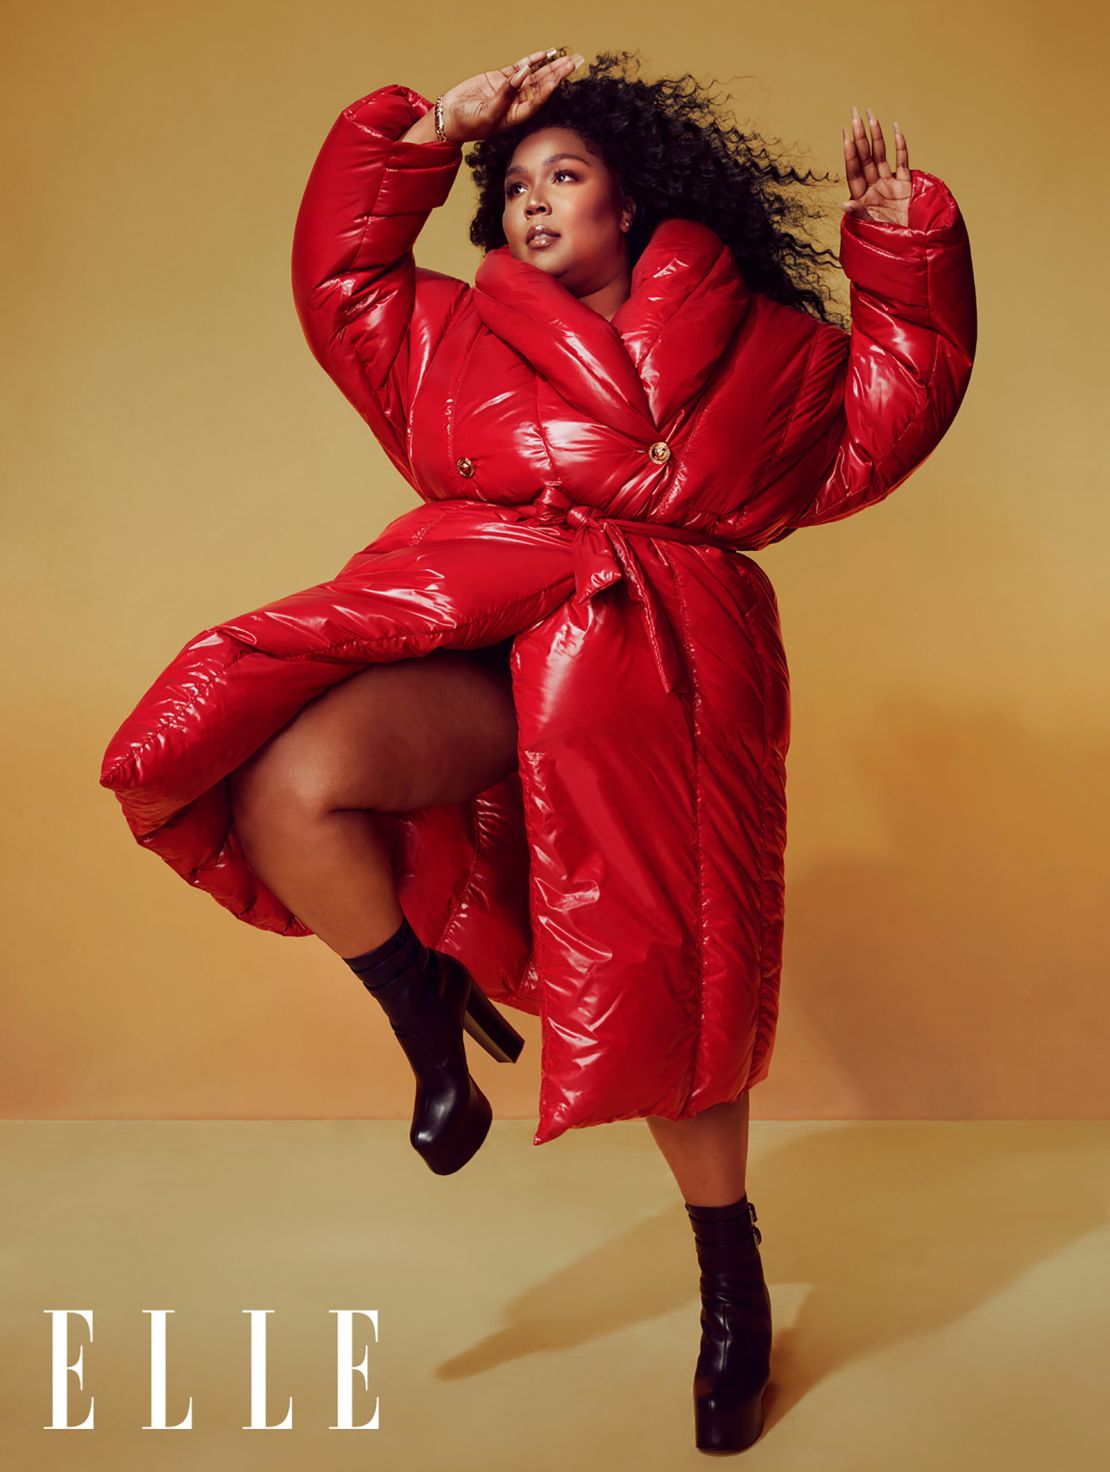 "I don't want to be the token big girl for the fashion world," Lizzo said.